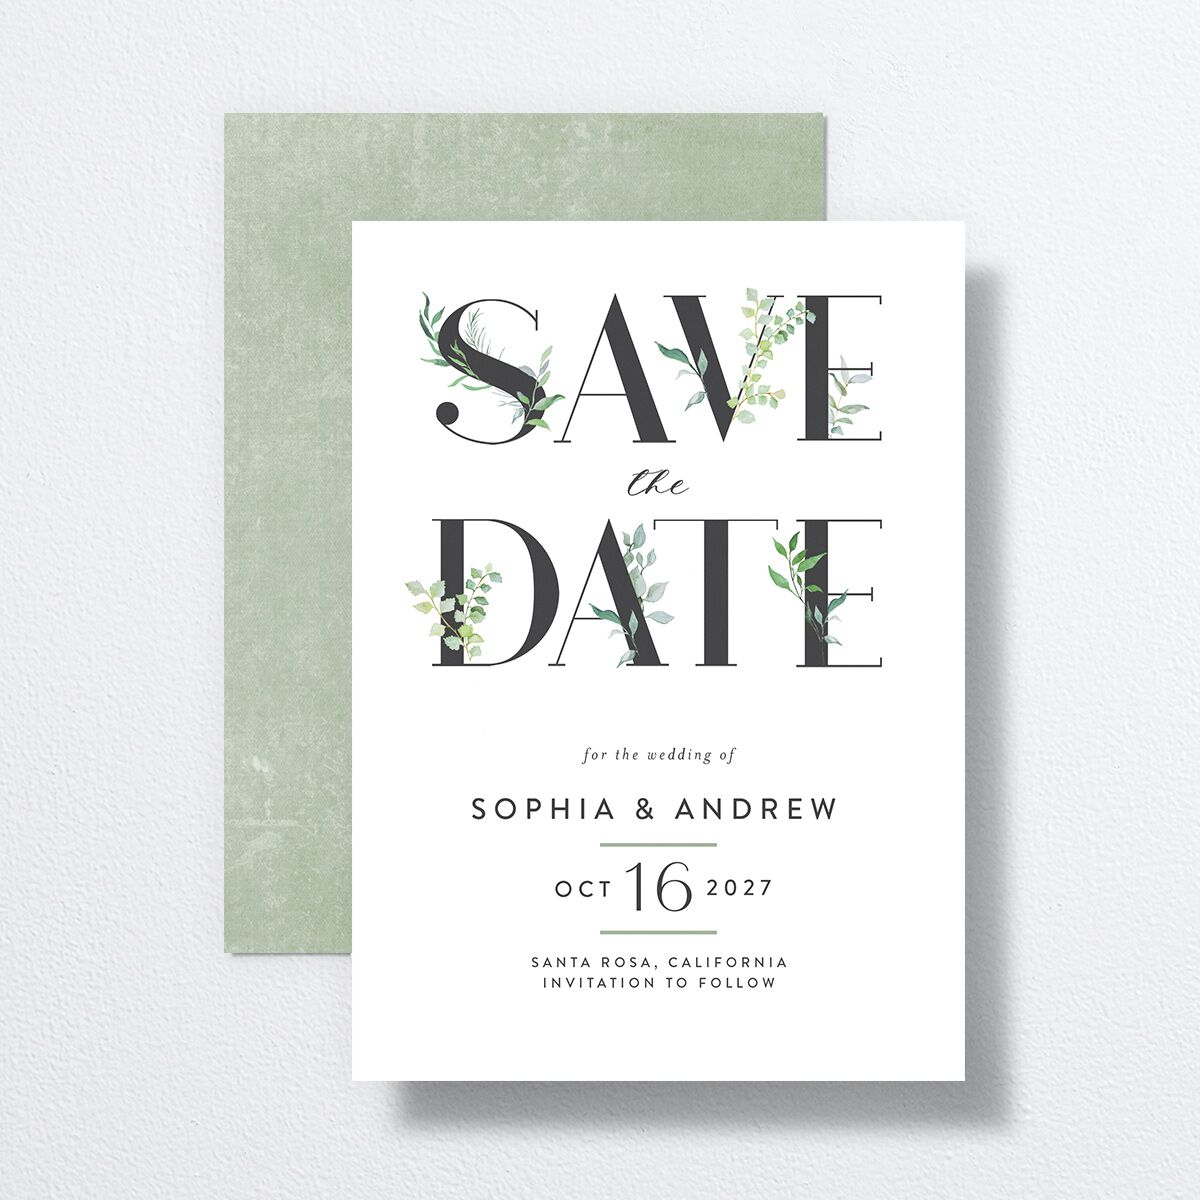 Leafy Ampersand Save The Date Cards front-and-back in green